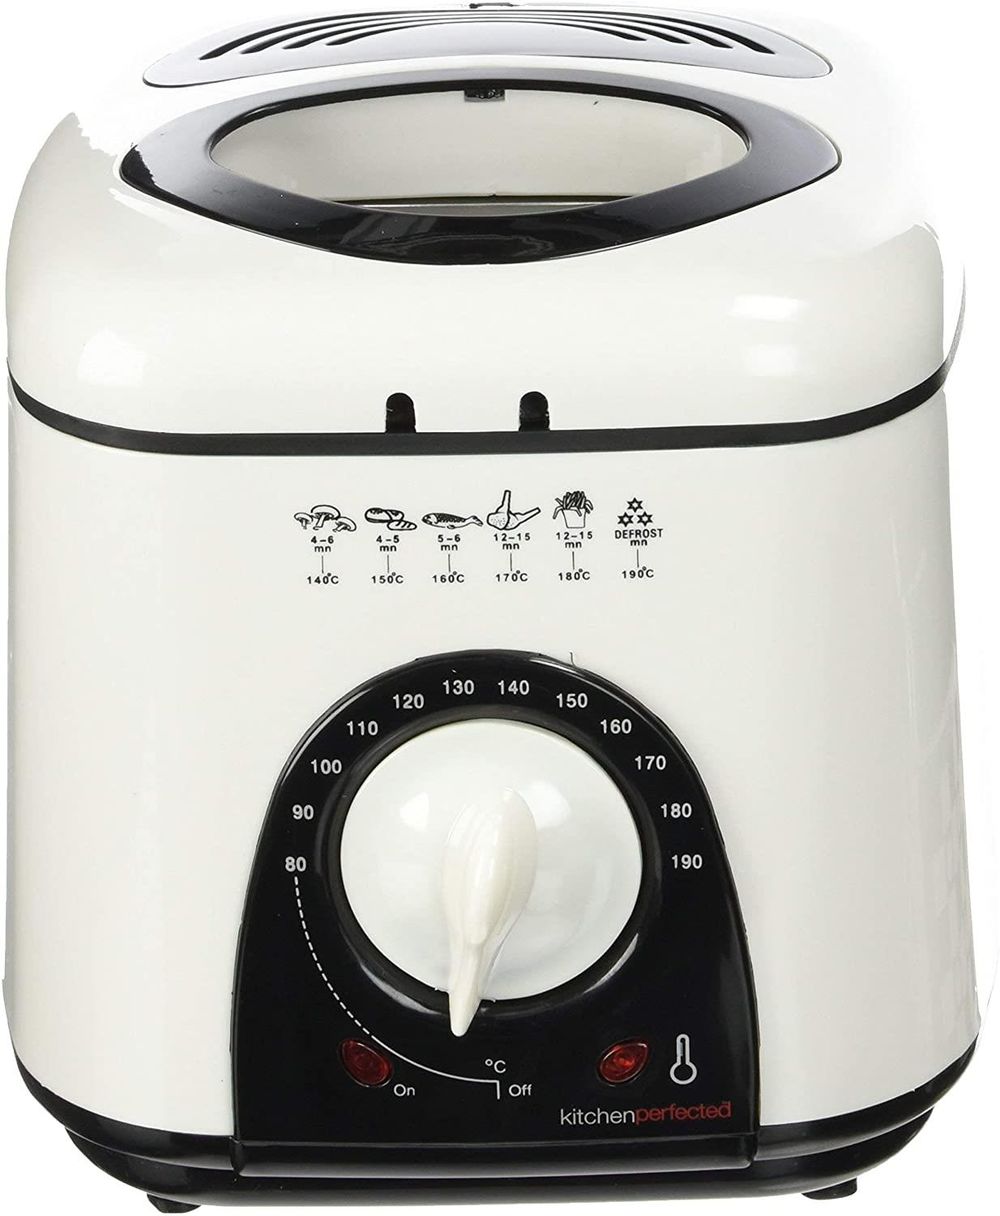 Kitchen Perfected 1.0Ltr Compact Deep Fryer - Ivory White